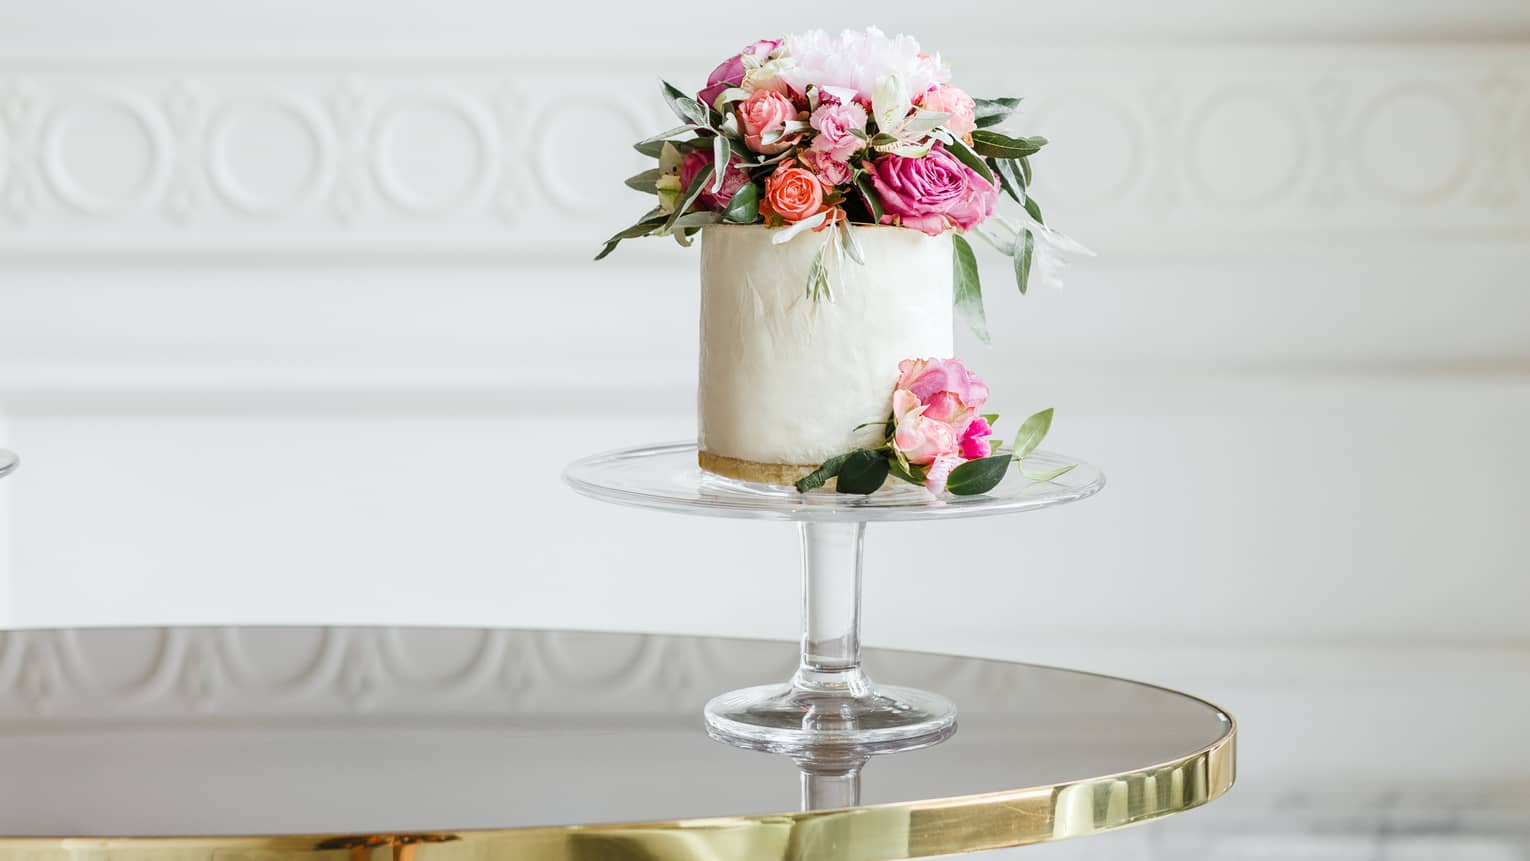 Elegant small white wedding cake topped with fresh pink and white roses 